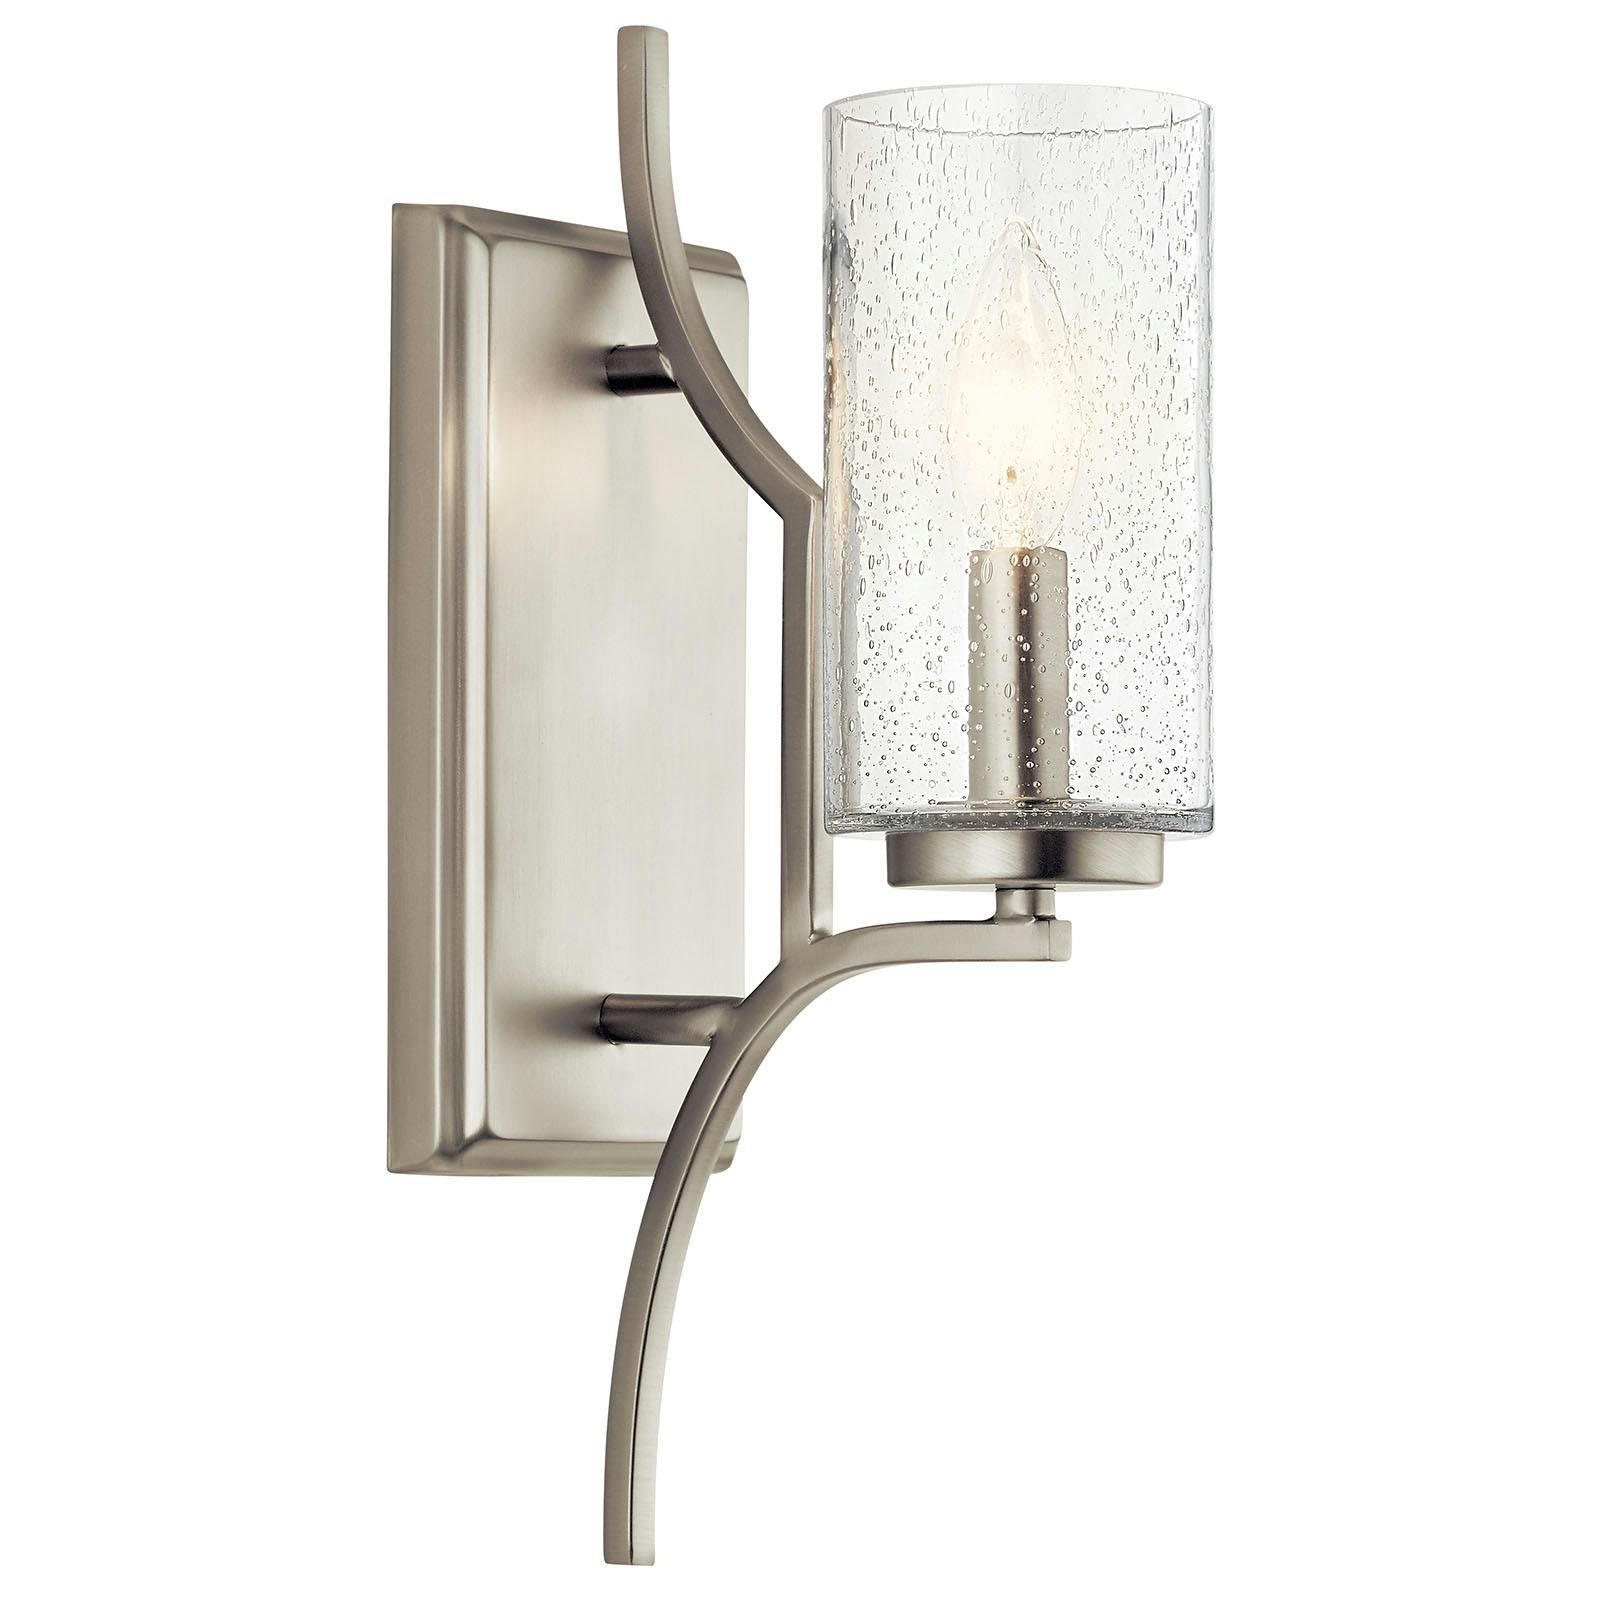 Vara 1 Light Wall Sconce Brushed Nickel on a white background